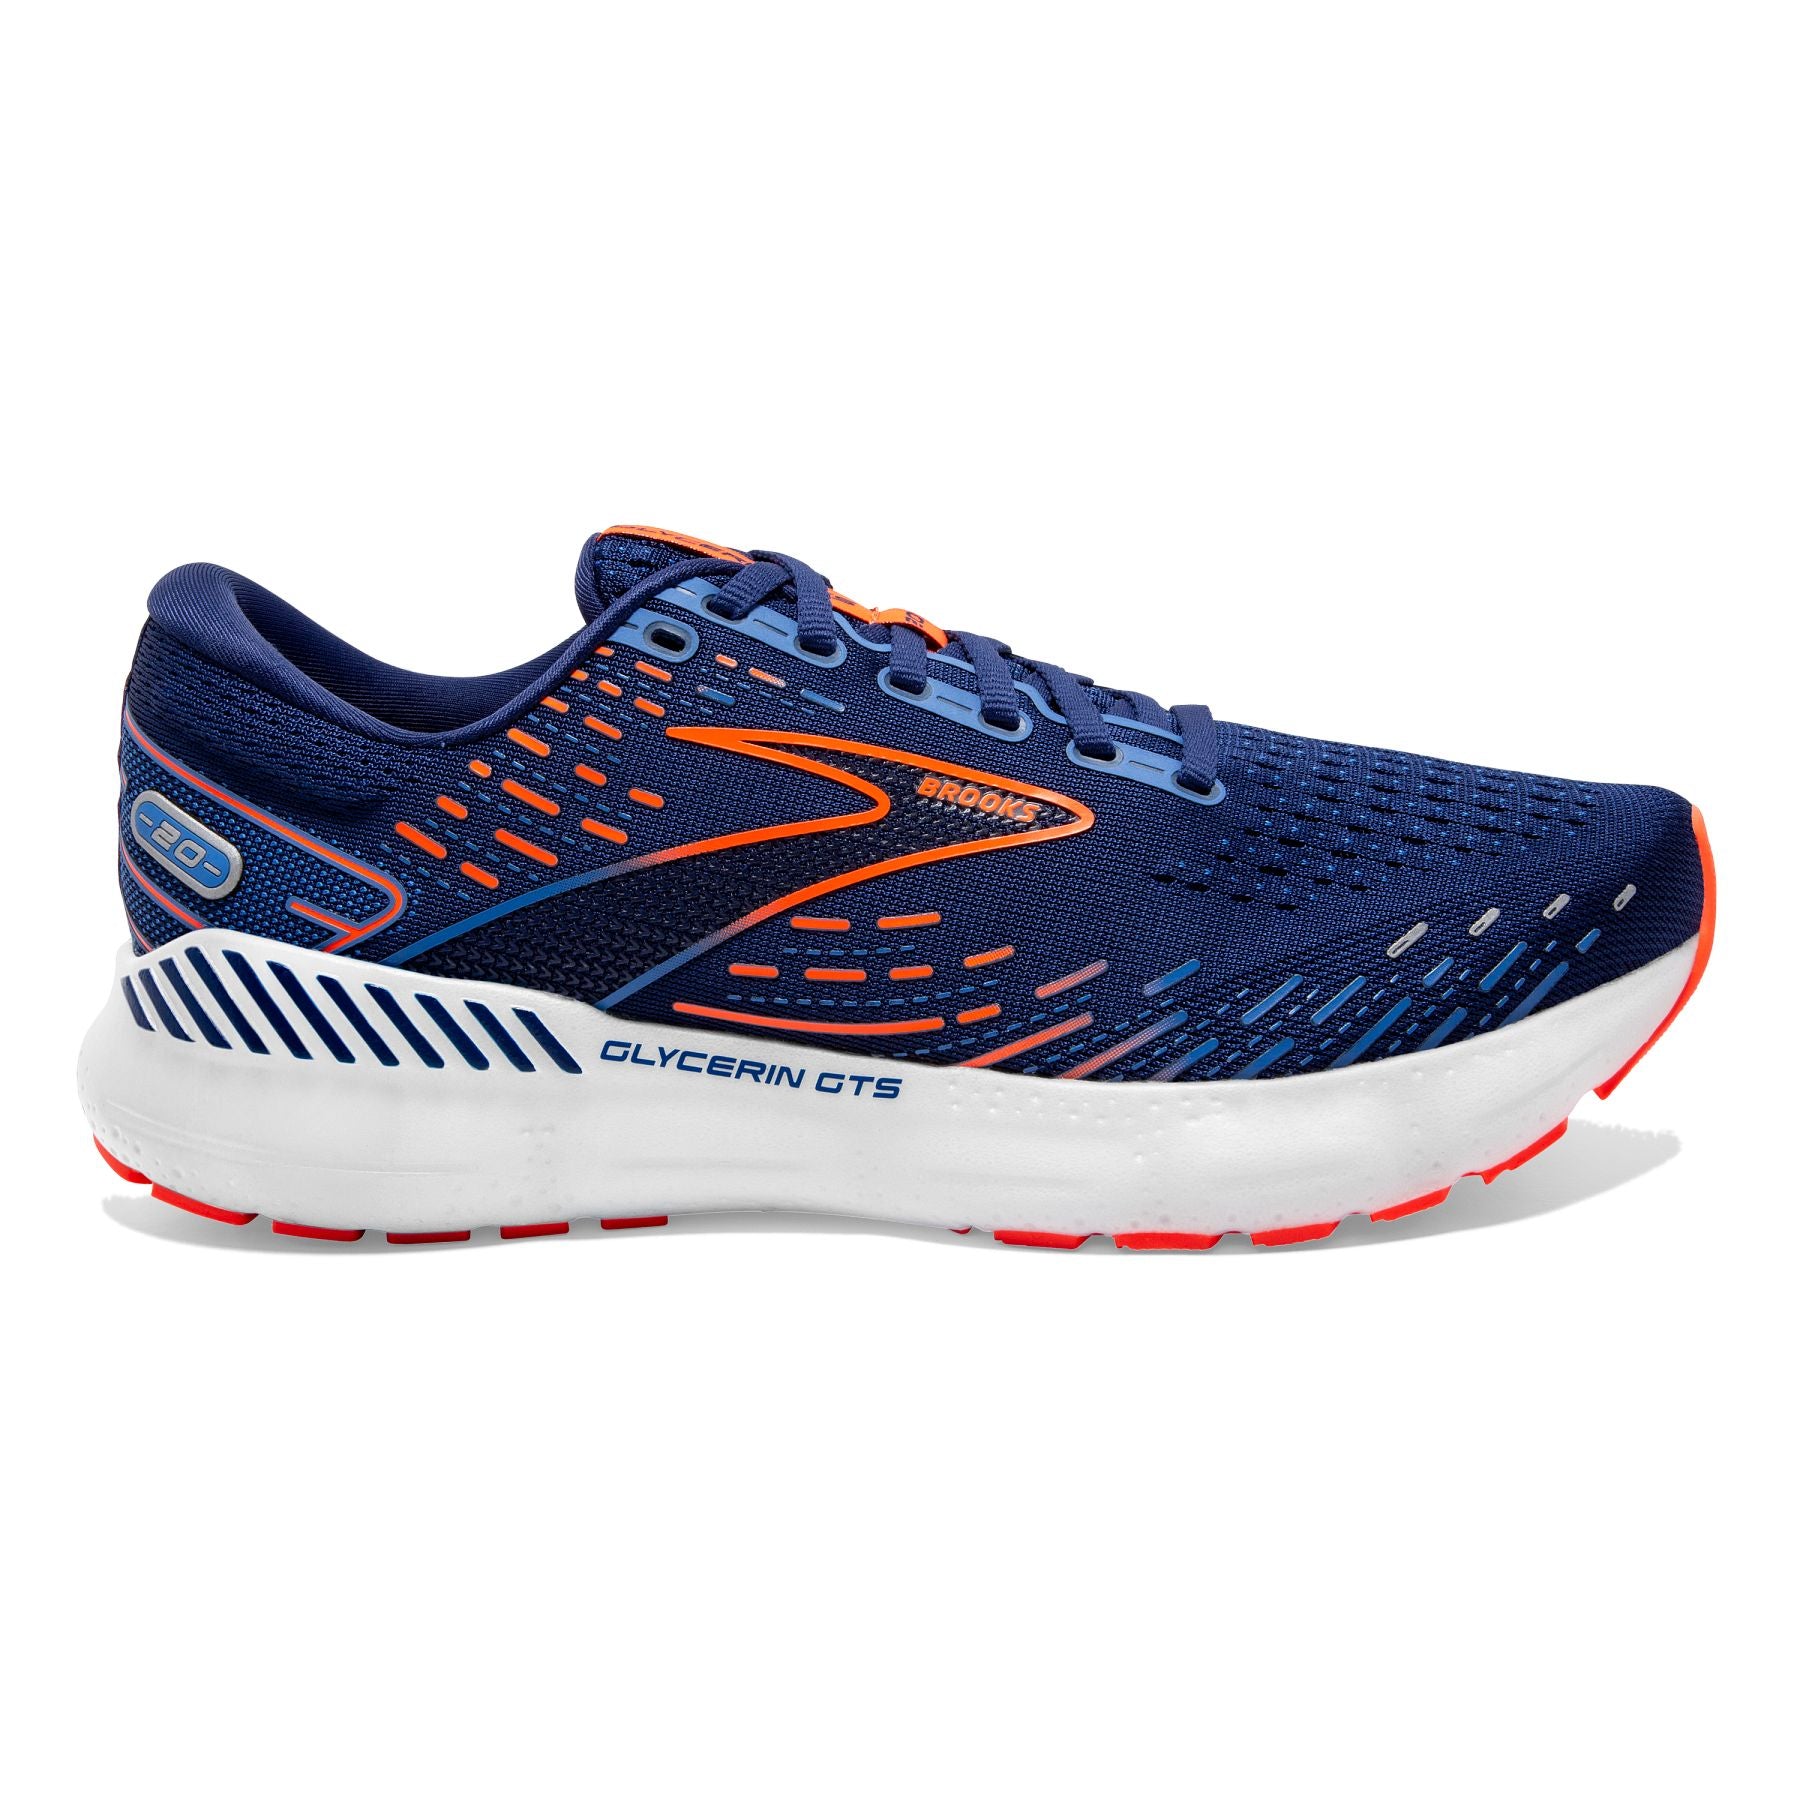 Lateral view of the Men's Glycerin GTS 20 in the wide 2E width, color Blue depths/Palace blue/Orange